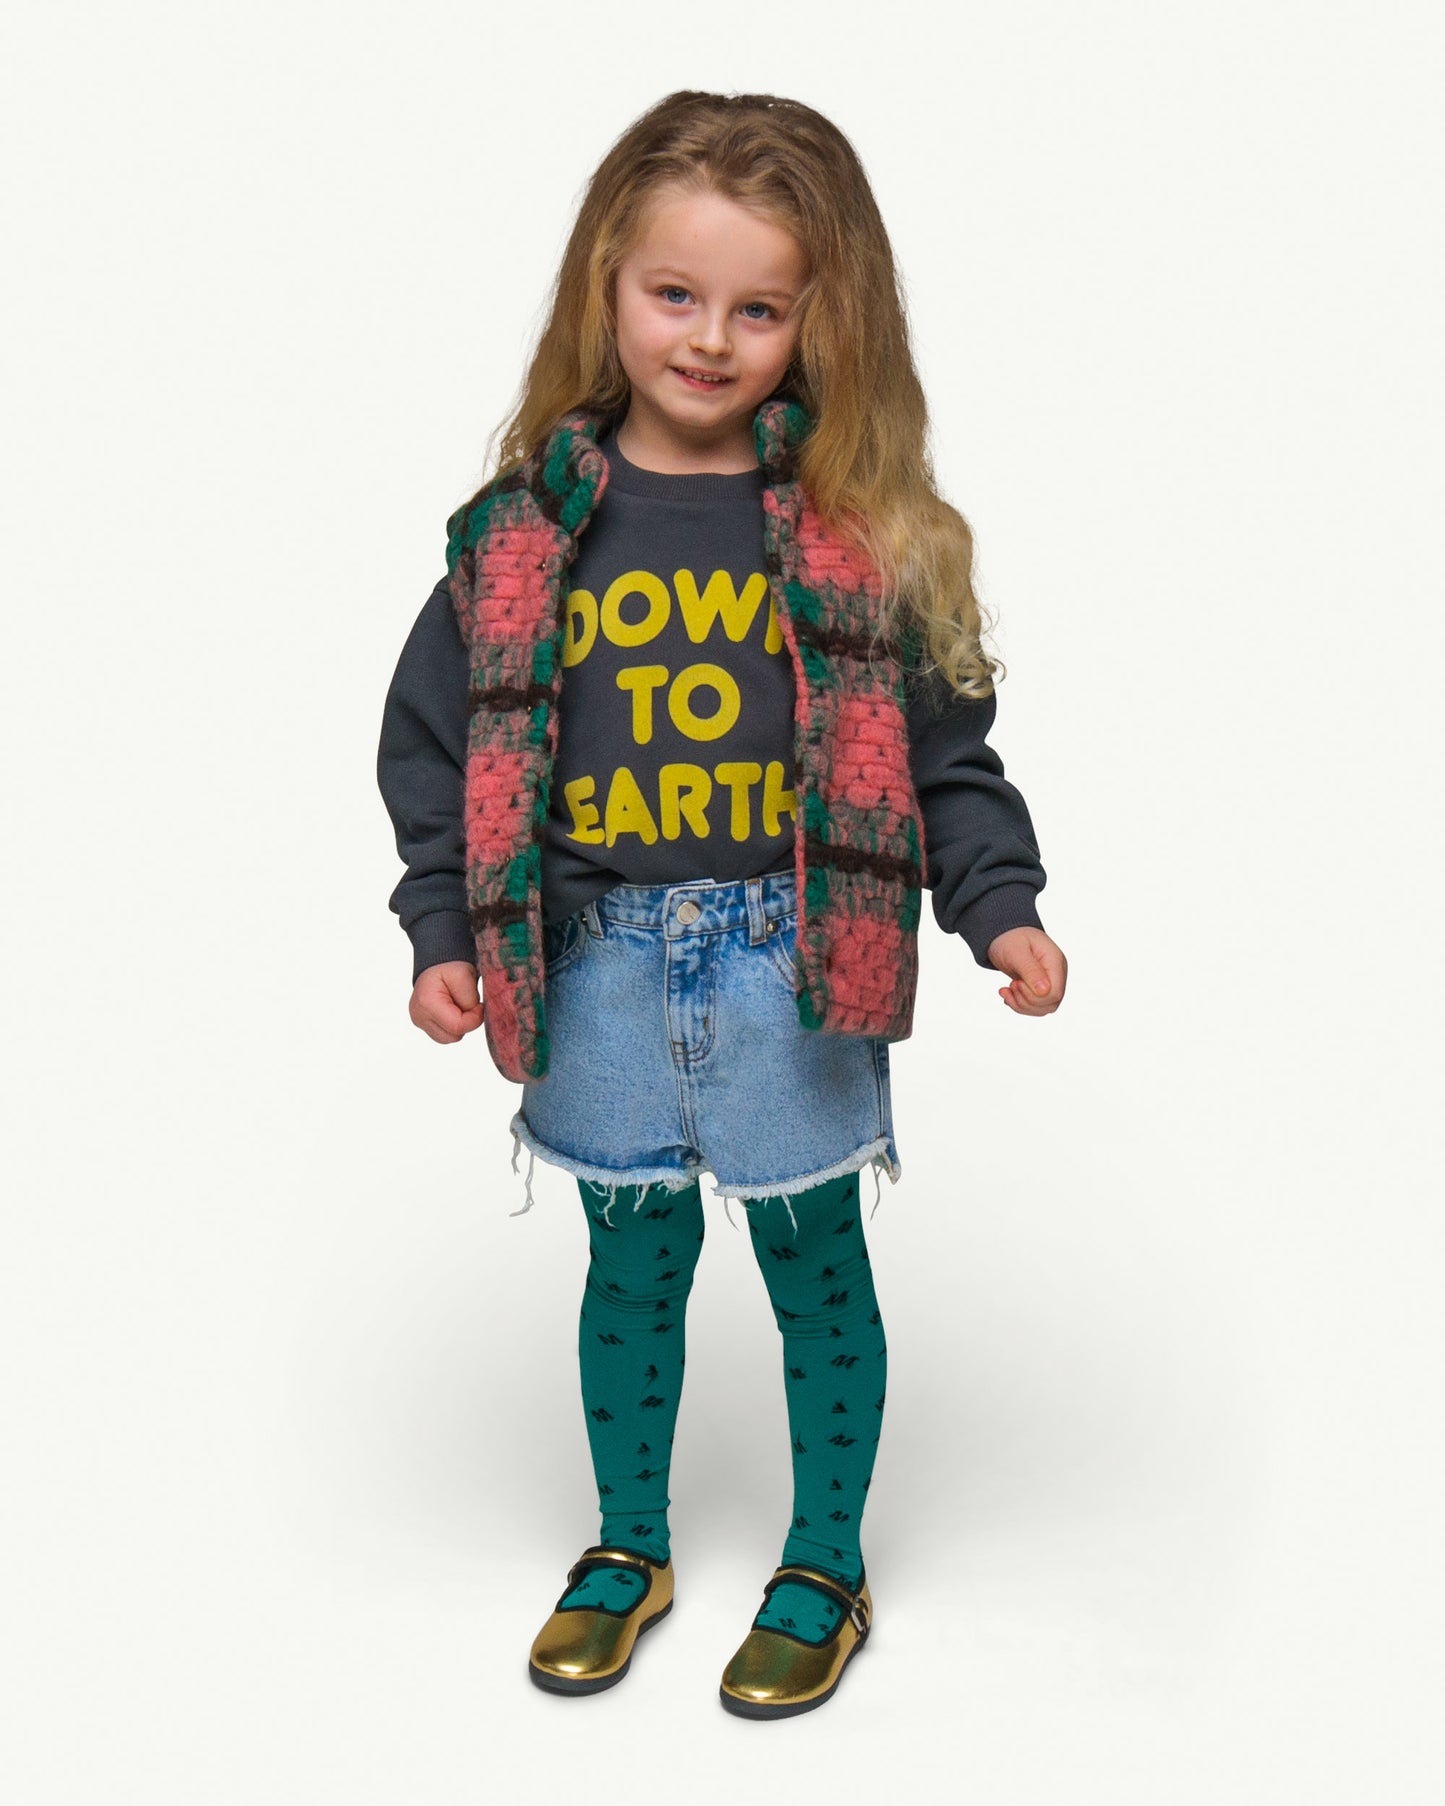 This picture shows a girl wearing the vintage black Sweater in a soft organic cotton fabric brushed on the inside with a bright yellow flock print text